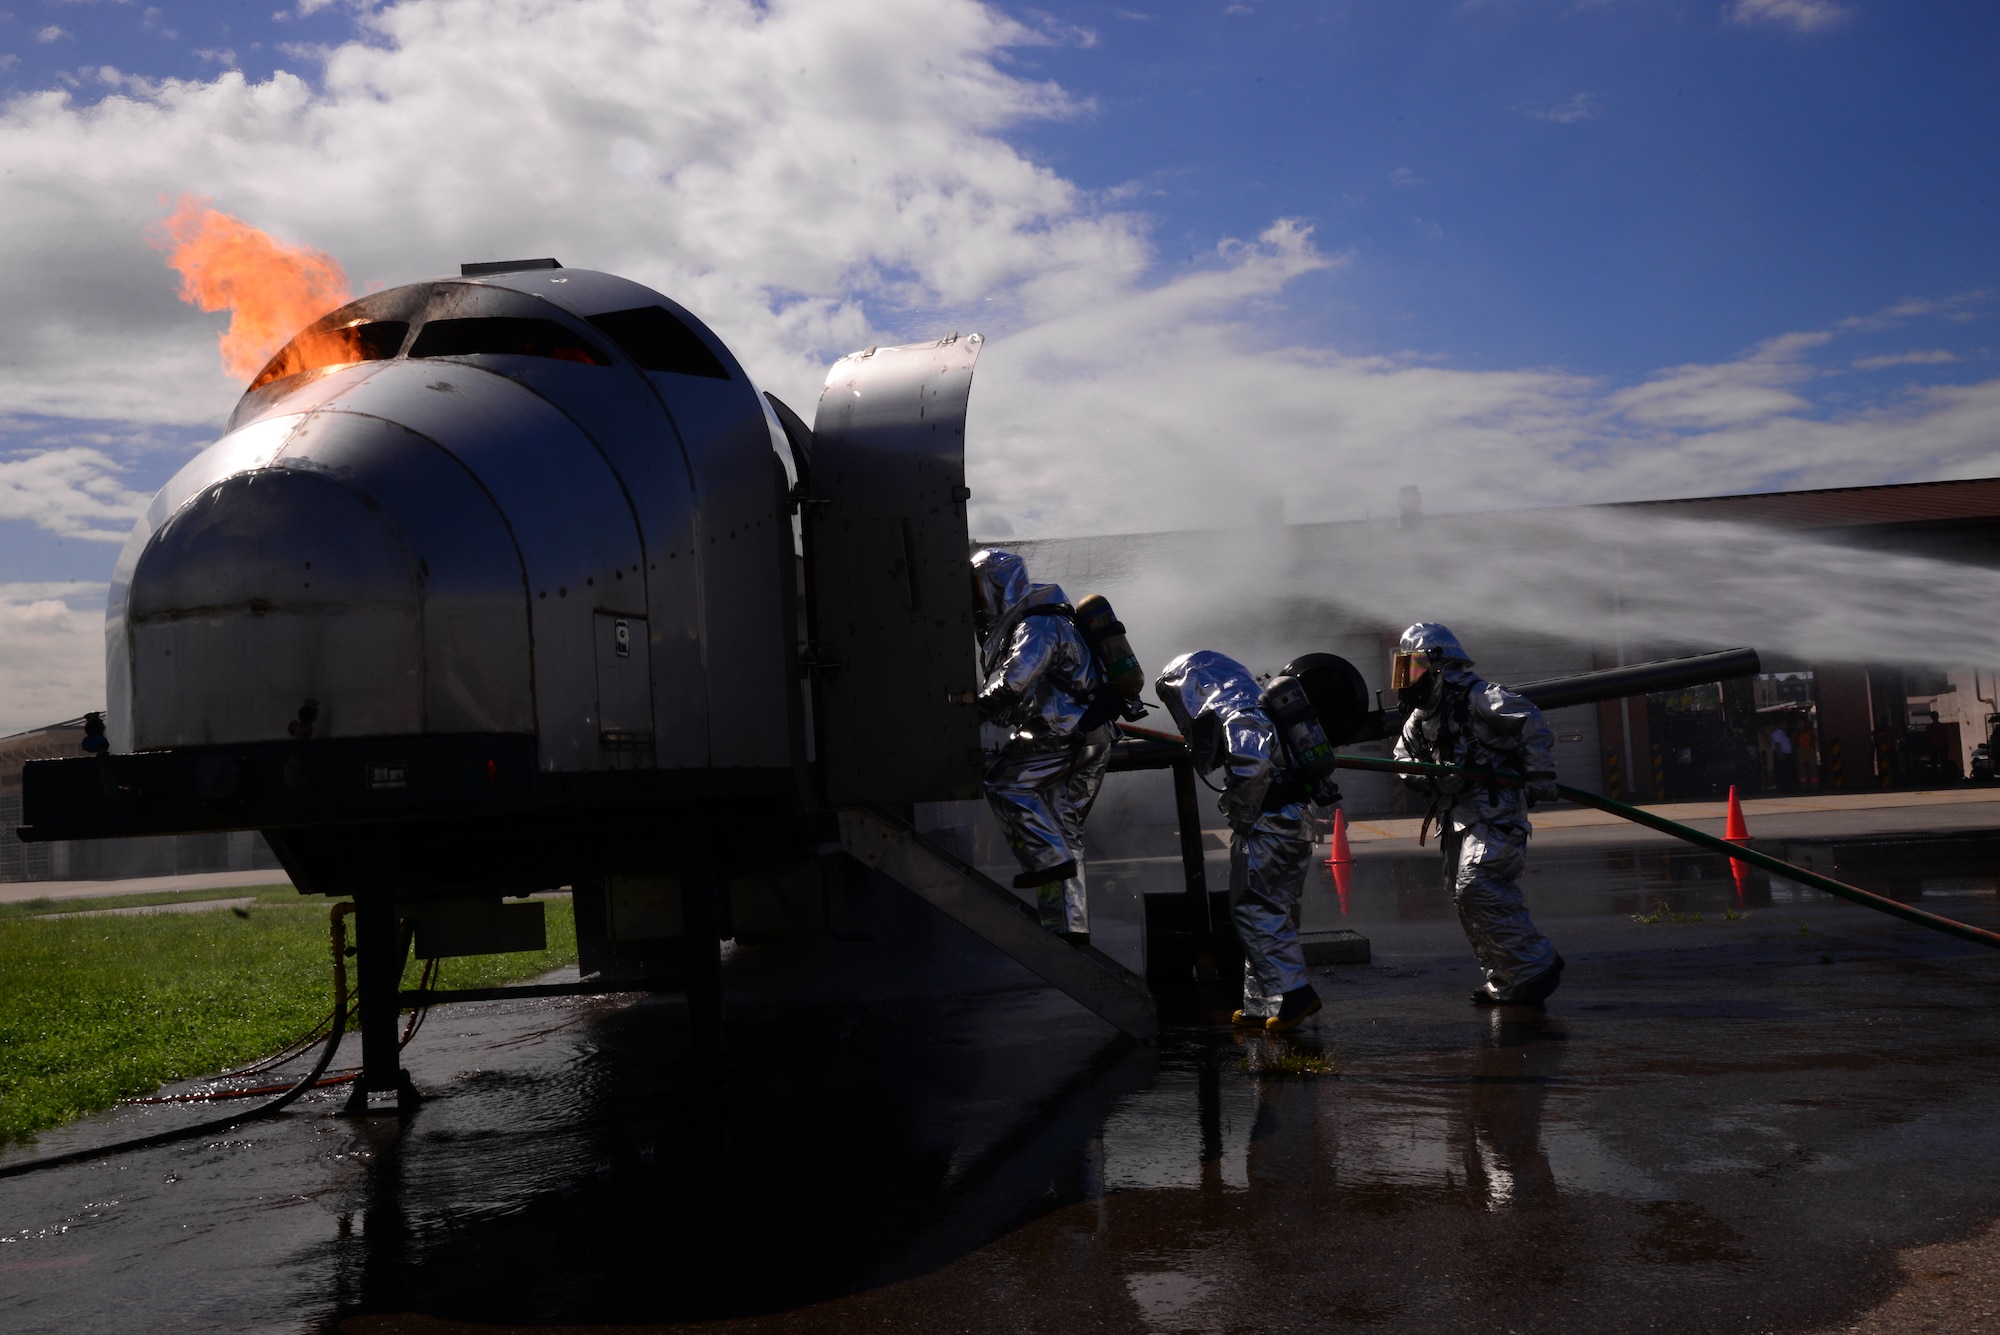 Two firefighters from the Songtan fire station followed by Staff Sgt. Michael White, 51st Civil Engineer Squadron crew chief, enter a training aircraft to perform a fire extinguishing exercise Aug 26, 2015, at Osan Air Base, Republic of Korea. Firefighters from the 51st CES recently hosted a fire-training event and invited the local firefighters as well as firefighters from the Republic of Korea air force to participate. (U. S. Air Force photo by Staff Sgt. Benjamin Sutton) 